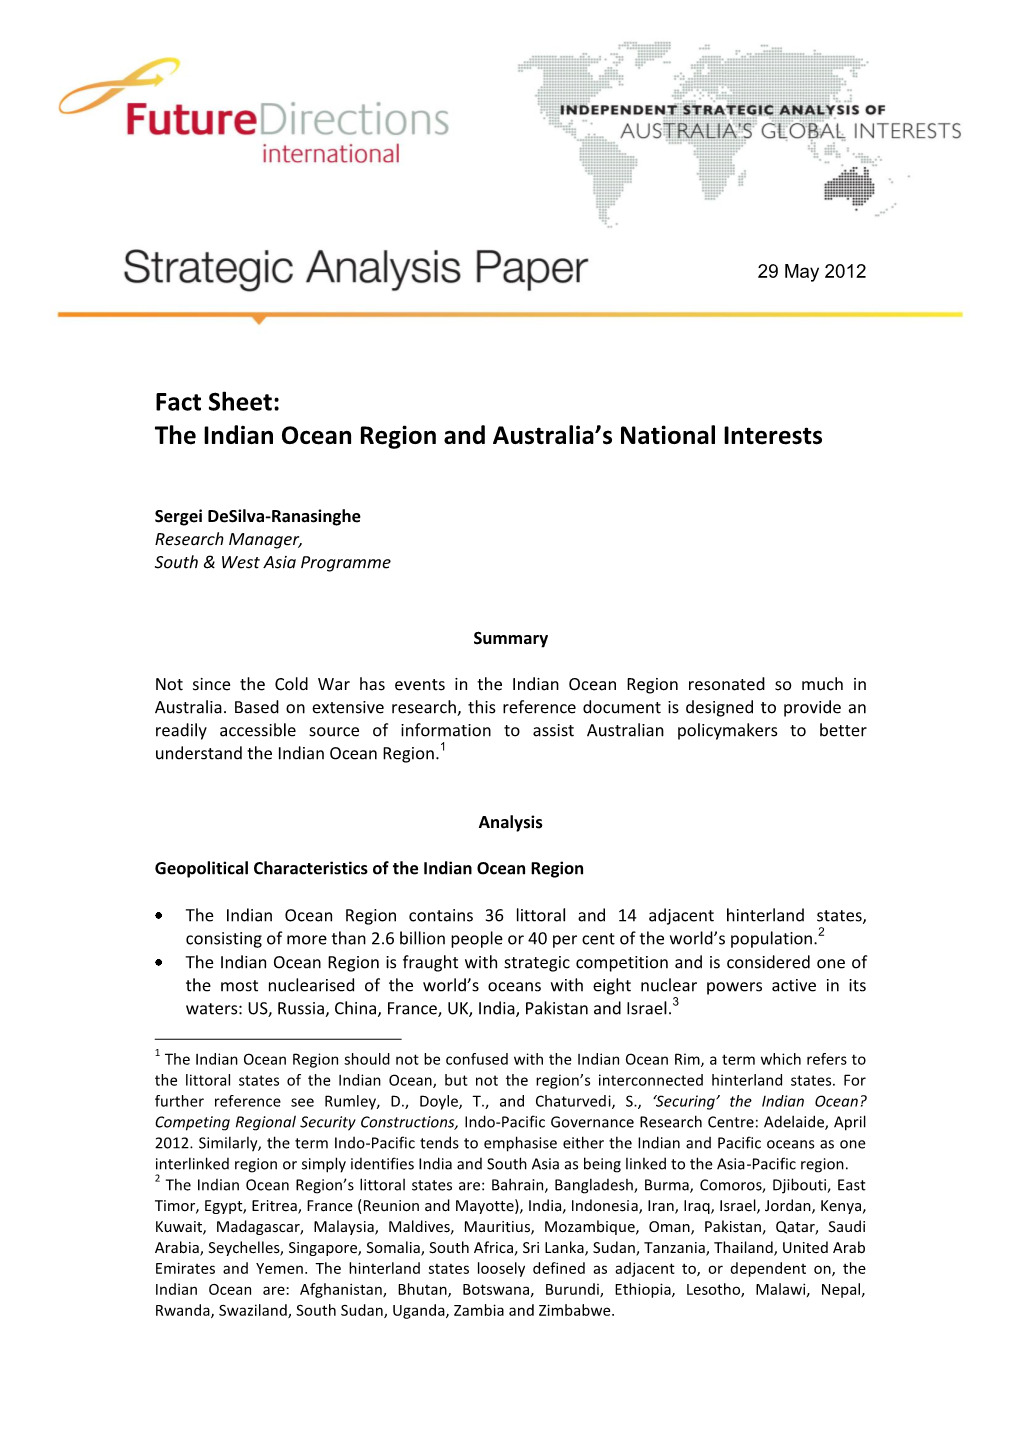 Fact Sheet: the Indian Ocean Region and Australia's National Interests